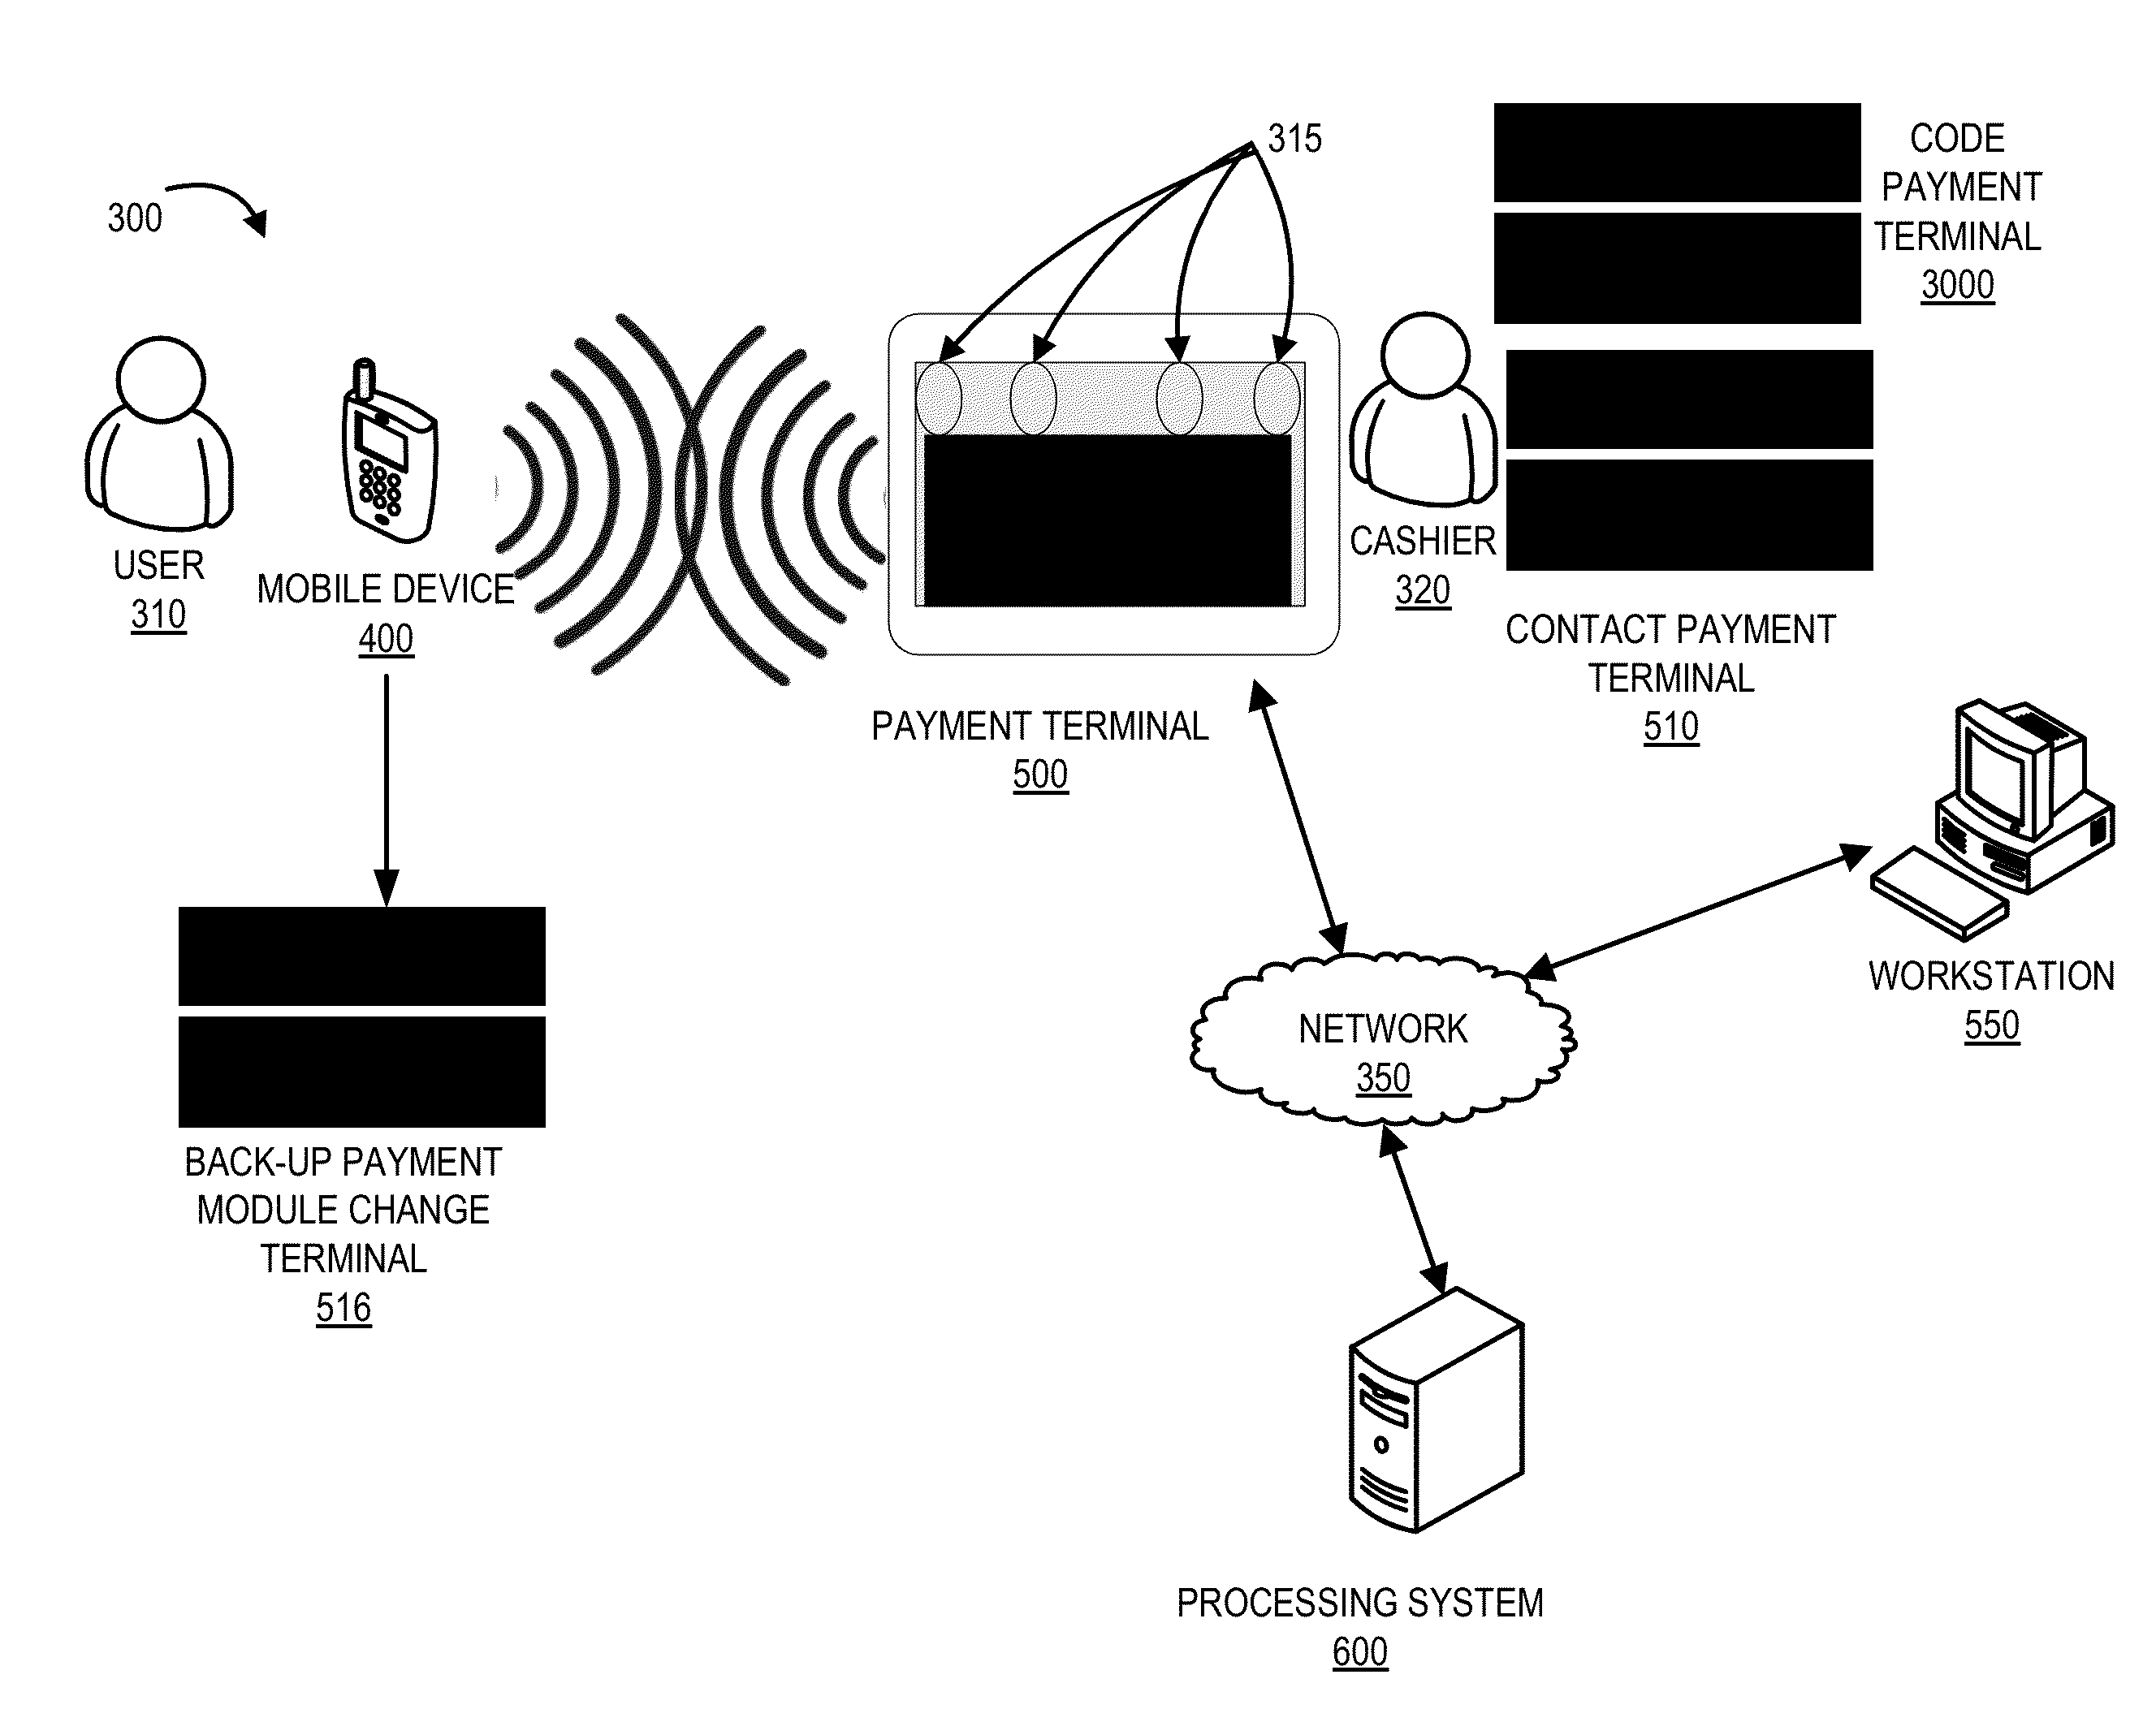 Mobile apparatus with back-up payment system